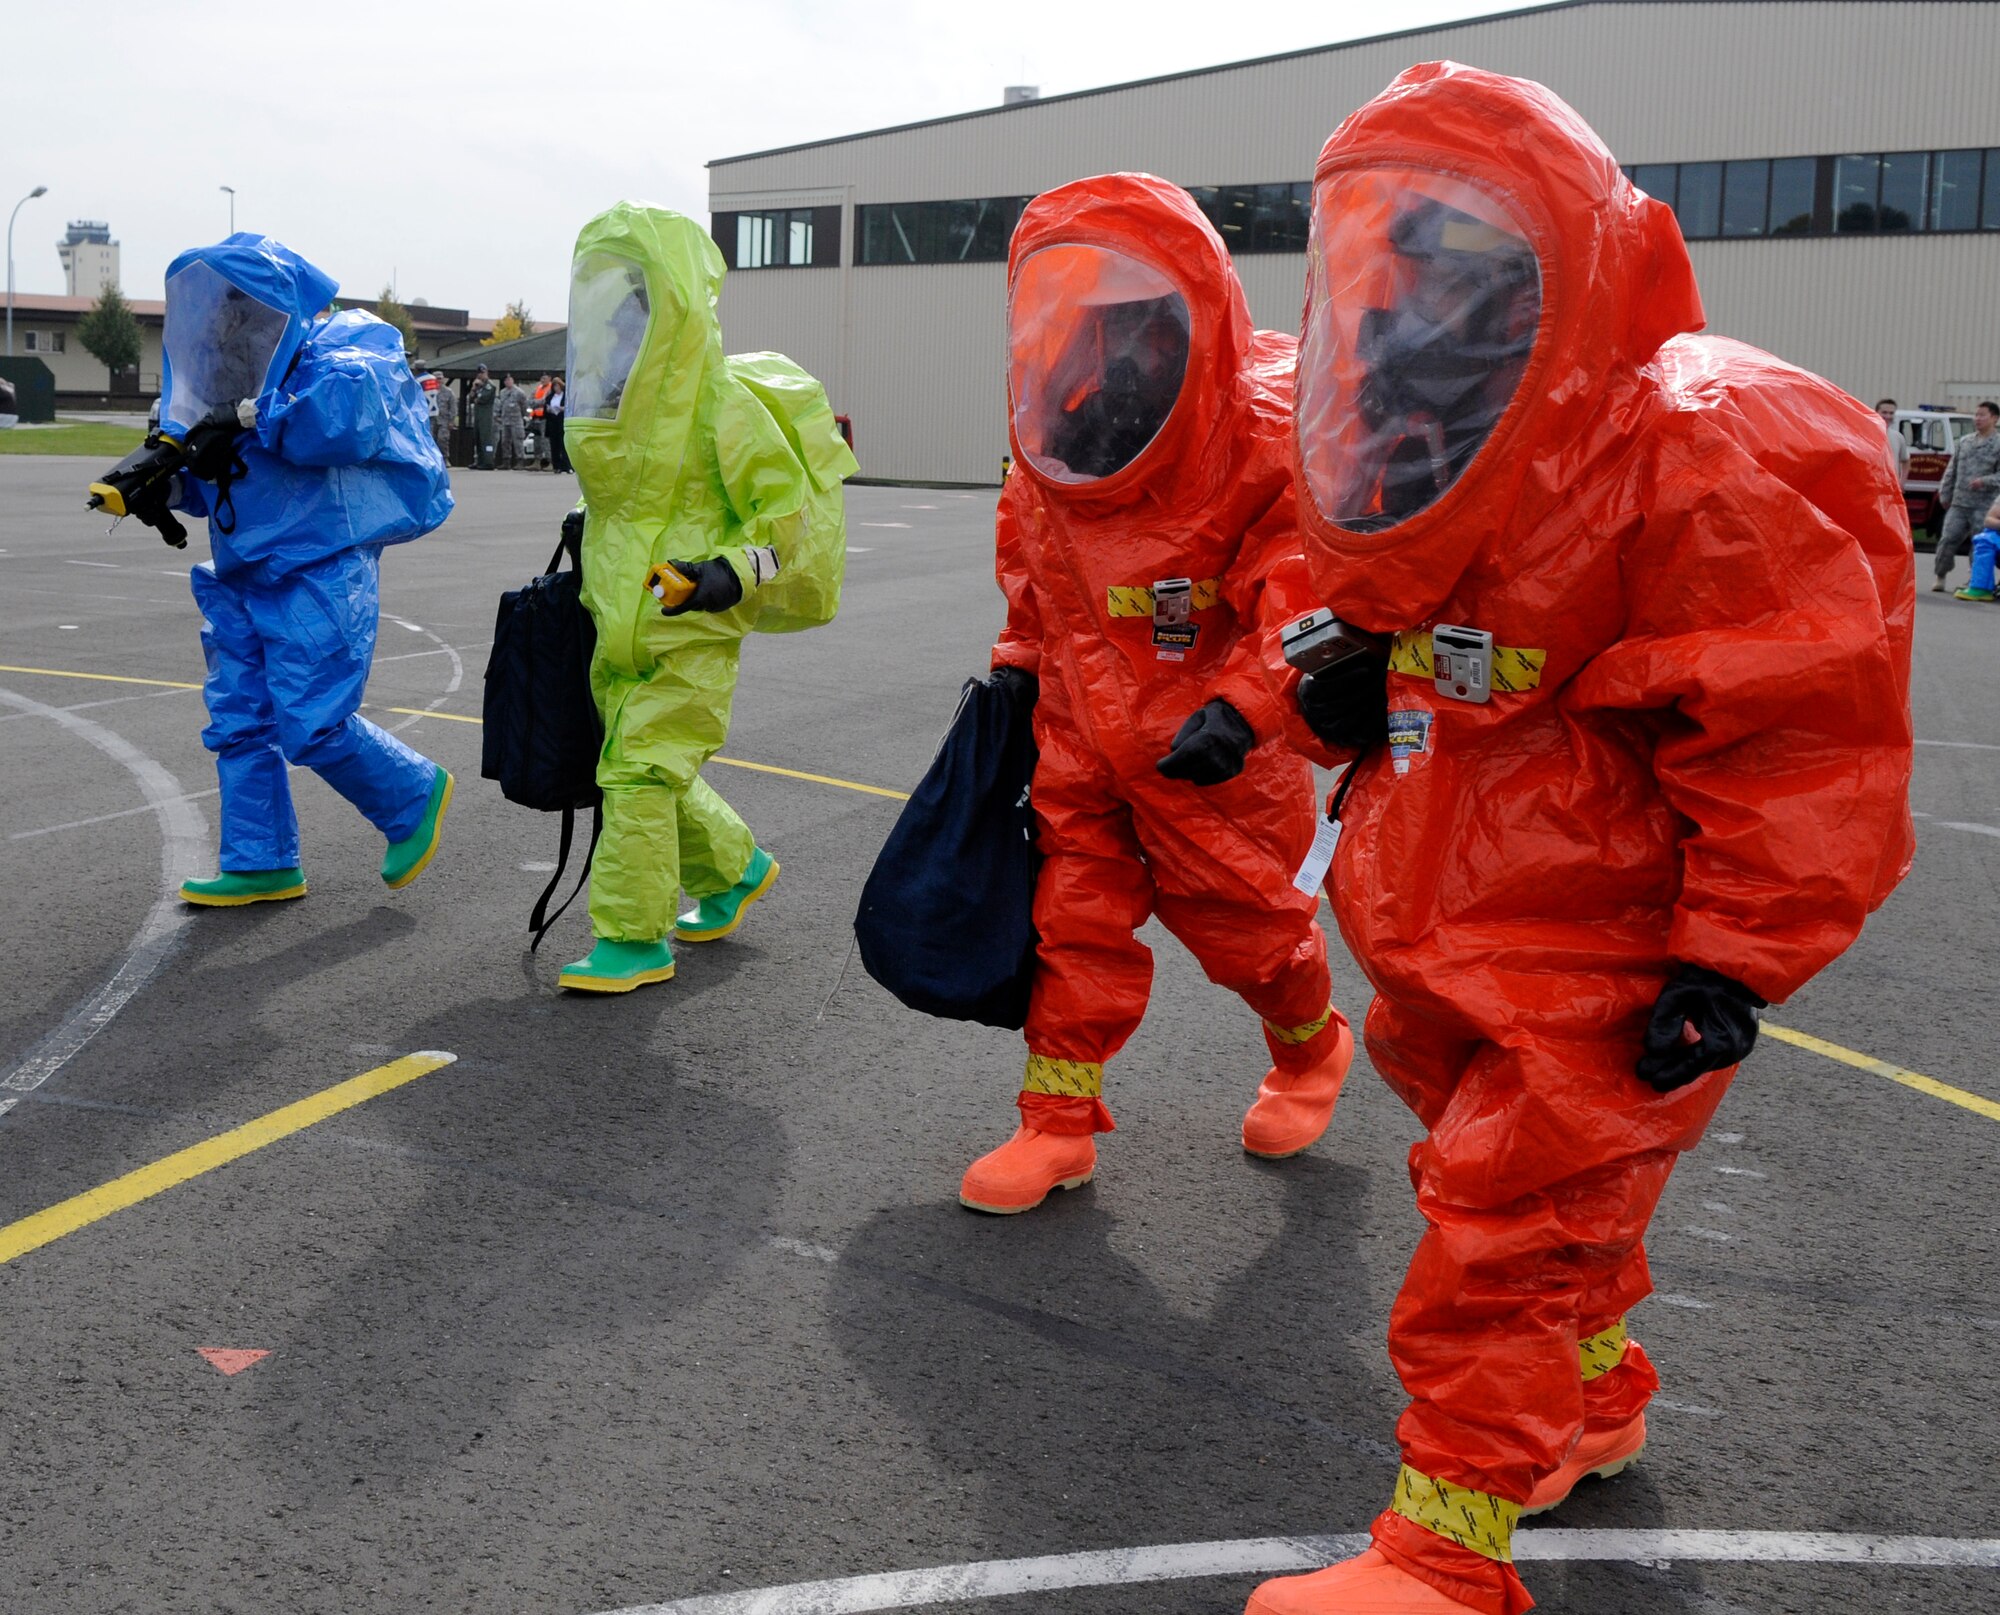 SPANGDAHLEM AIR BASE, Germany – Members from the Full-Spectrum Threat Response Strike Team, 52nd Civil Engineer Squadron, walk toward a simulated chemical attack site during an all hazards response training emergency management and mass casualty exercise Oct. 7. The teams maintained an "all hazards" mentality to provide accurate, real-world results. (U.S. Air Force photo/Airman 1st Class Staci Miller)